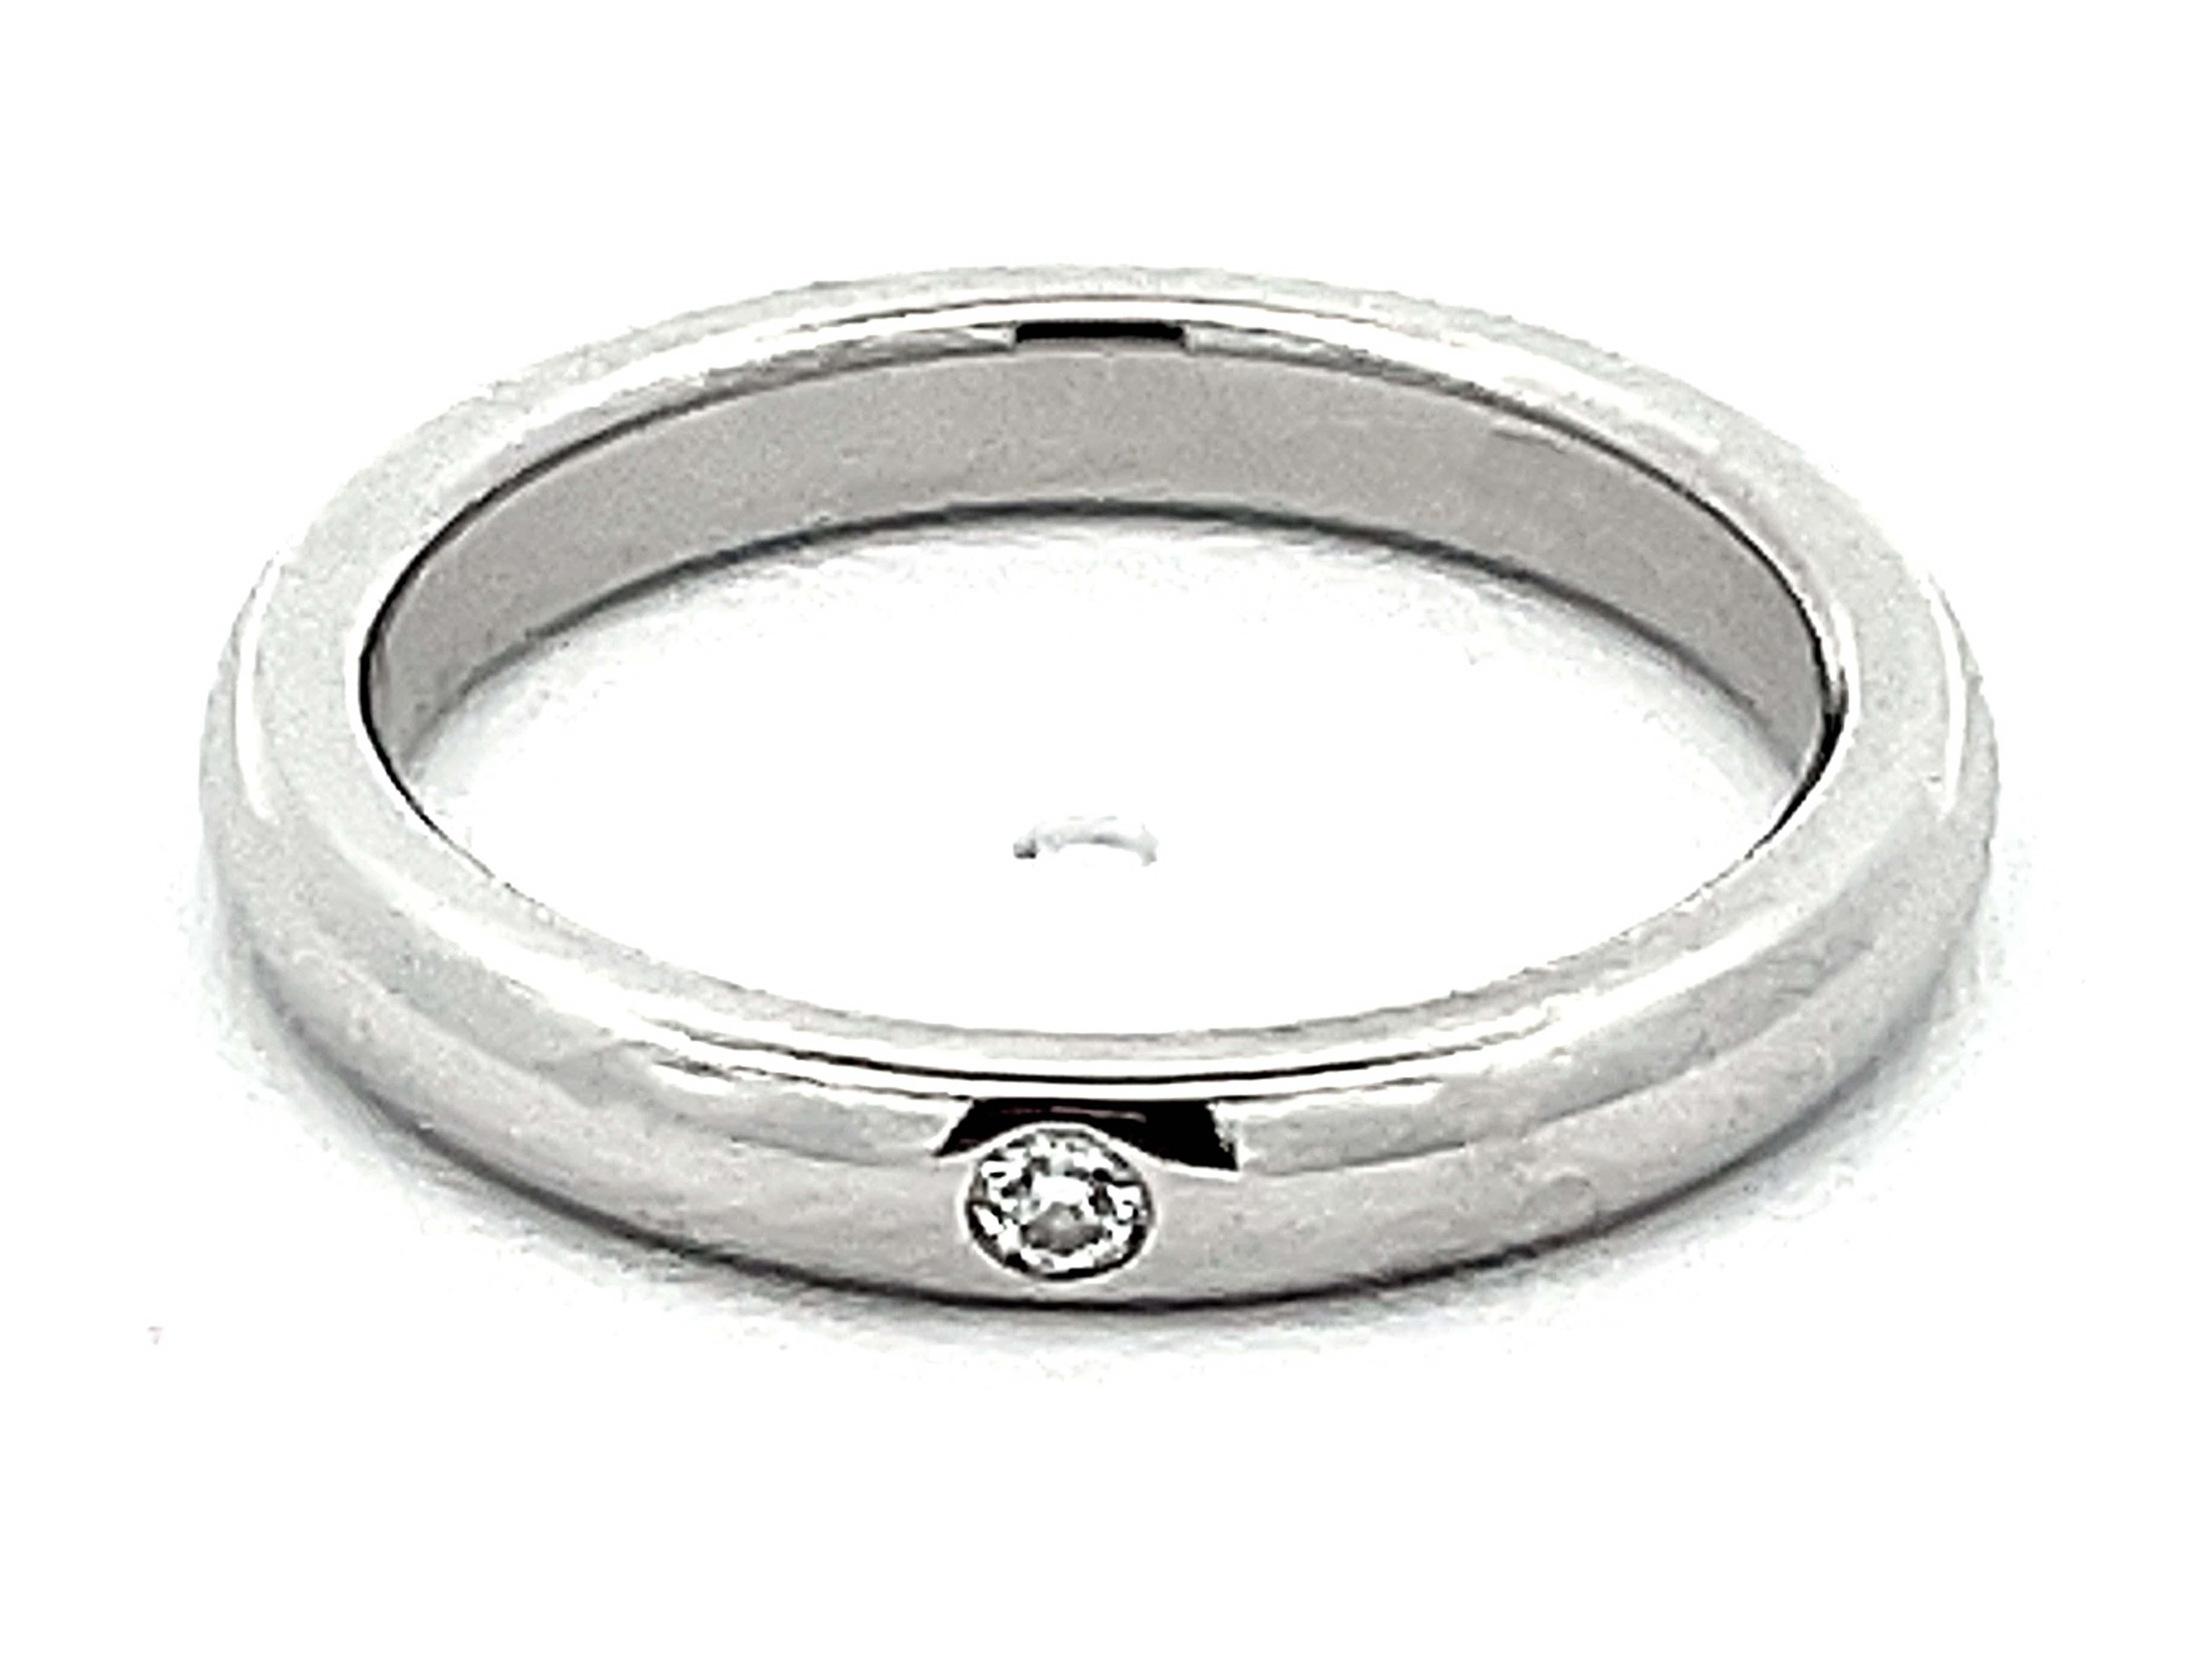 Tiffany & Co. Diamond Wedding Band Ring in Platinum In Excellent Condition For Sale In Honolulu, HI